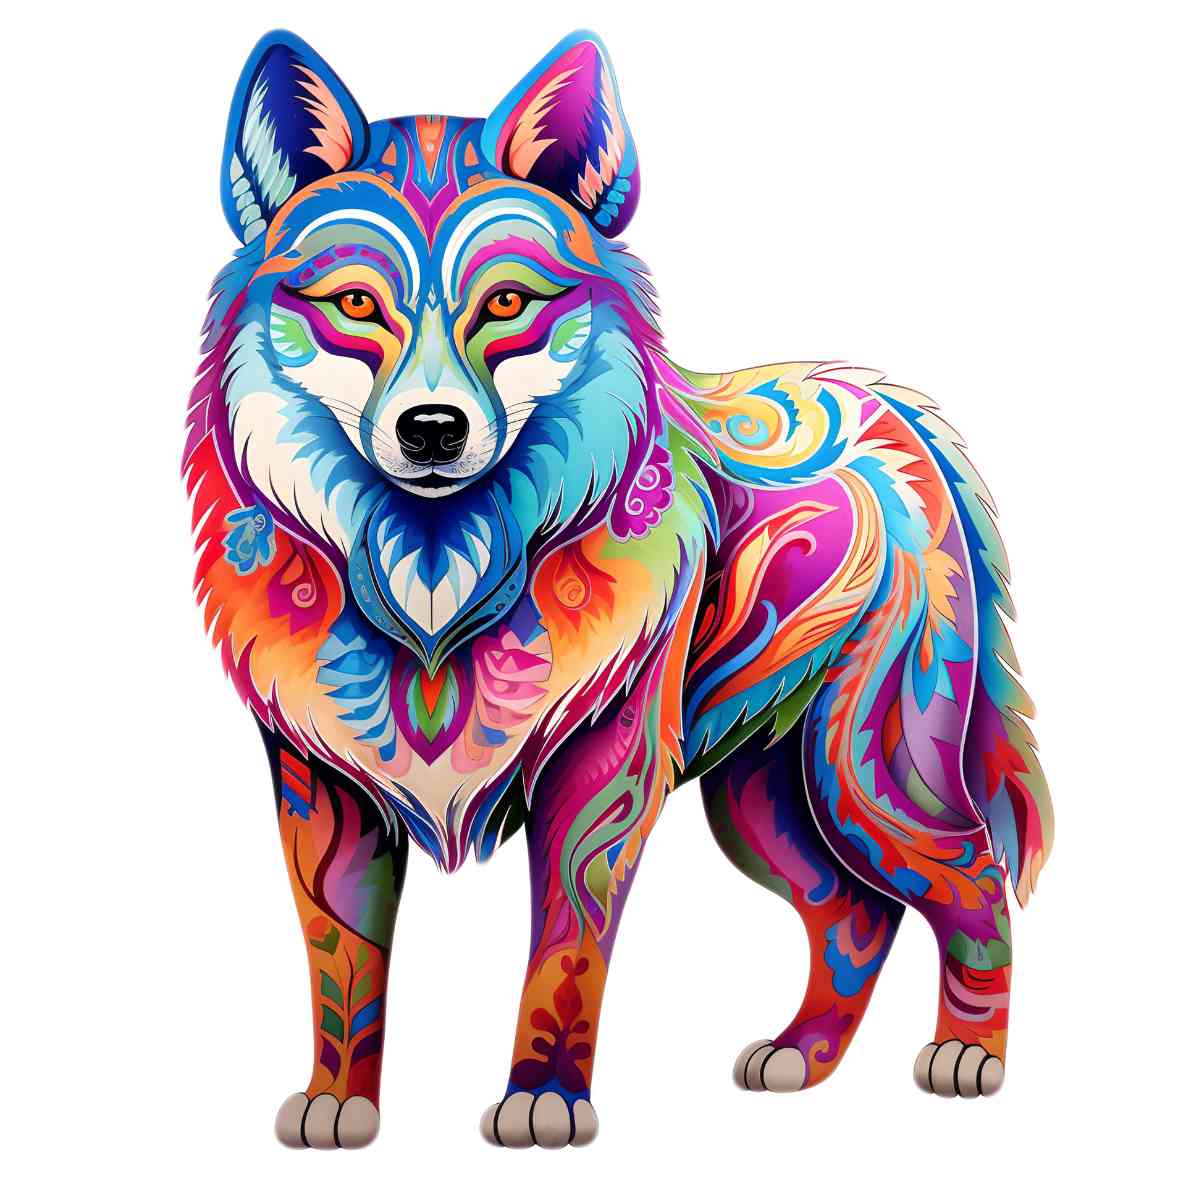 Animal Jigsaw Puzzle > Wooden Jigsaw Puzzle > Jigsaw Puzzle A3 Husky Dog - Jigsaw Puzzle